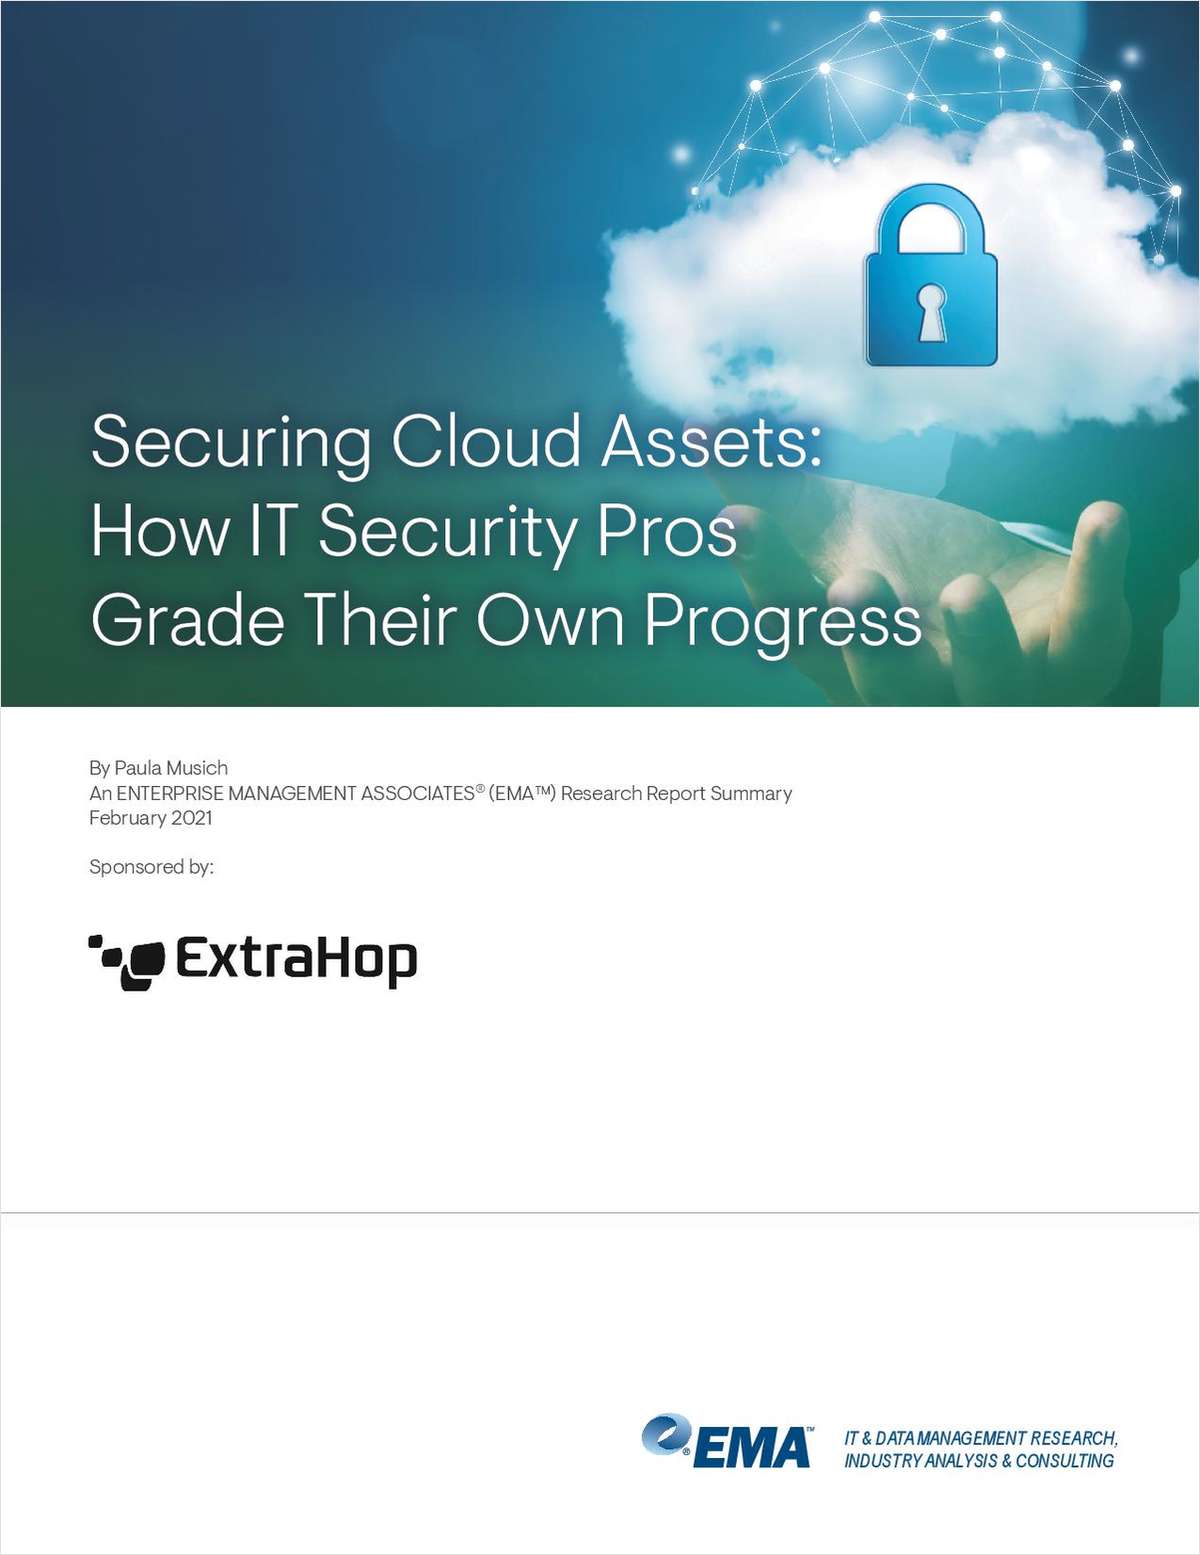 EMA - Security Cloud Assets: How IT Security Pros Grade Their Own Progress